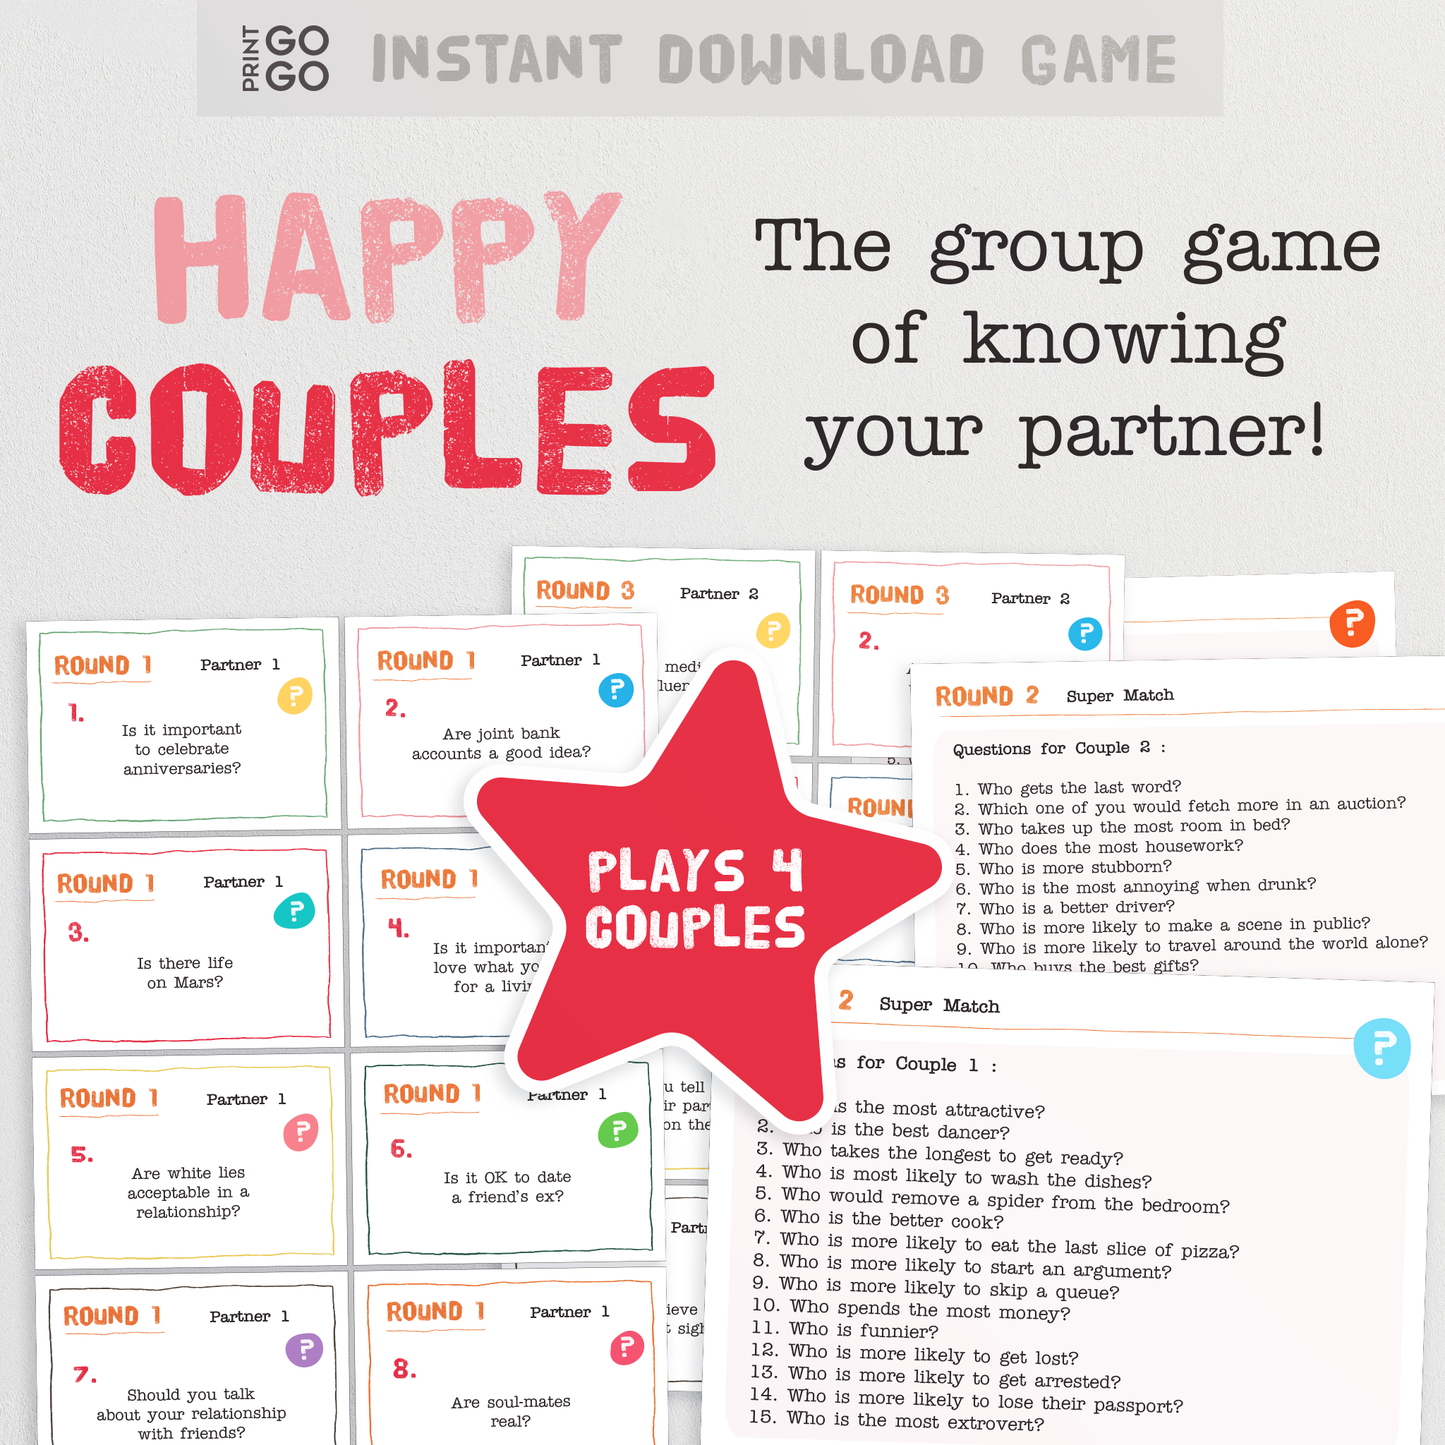 Happy Couples - The Group Game of Knowing Your Partner!